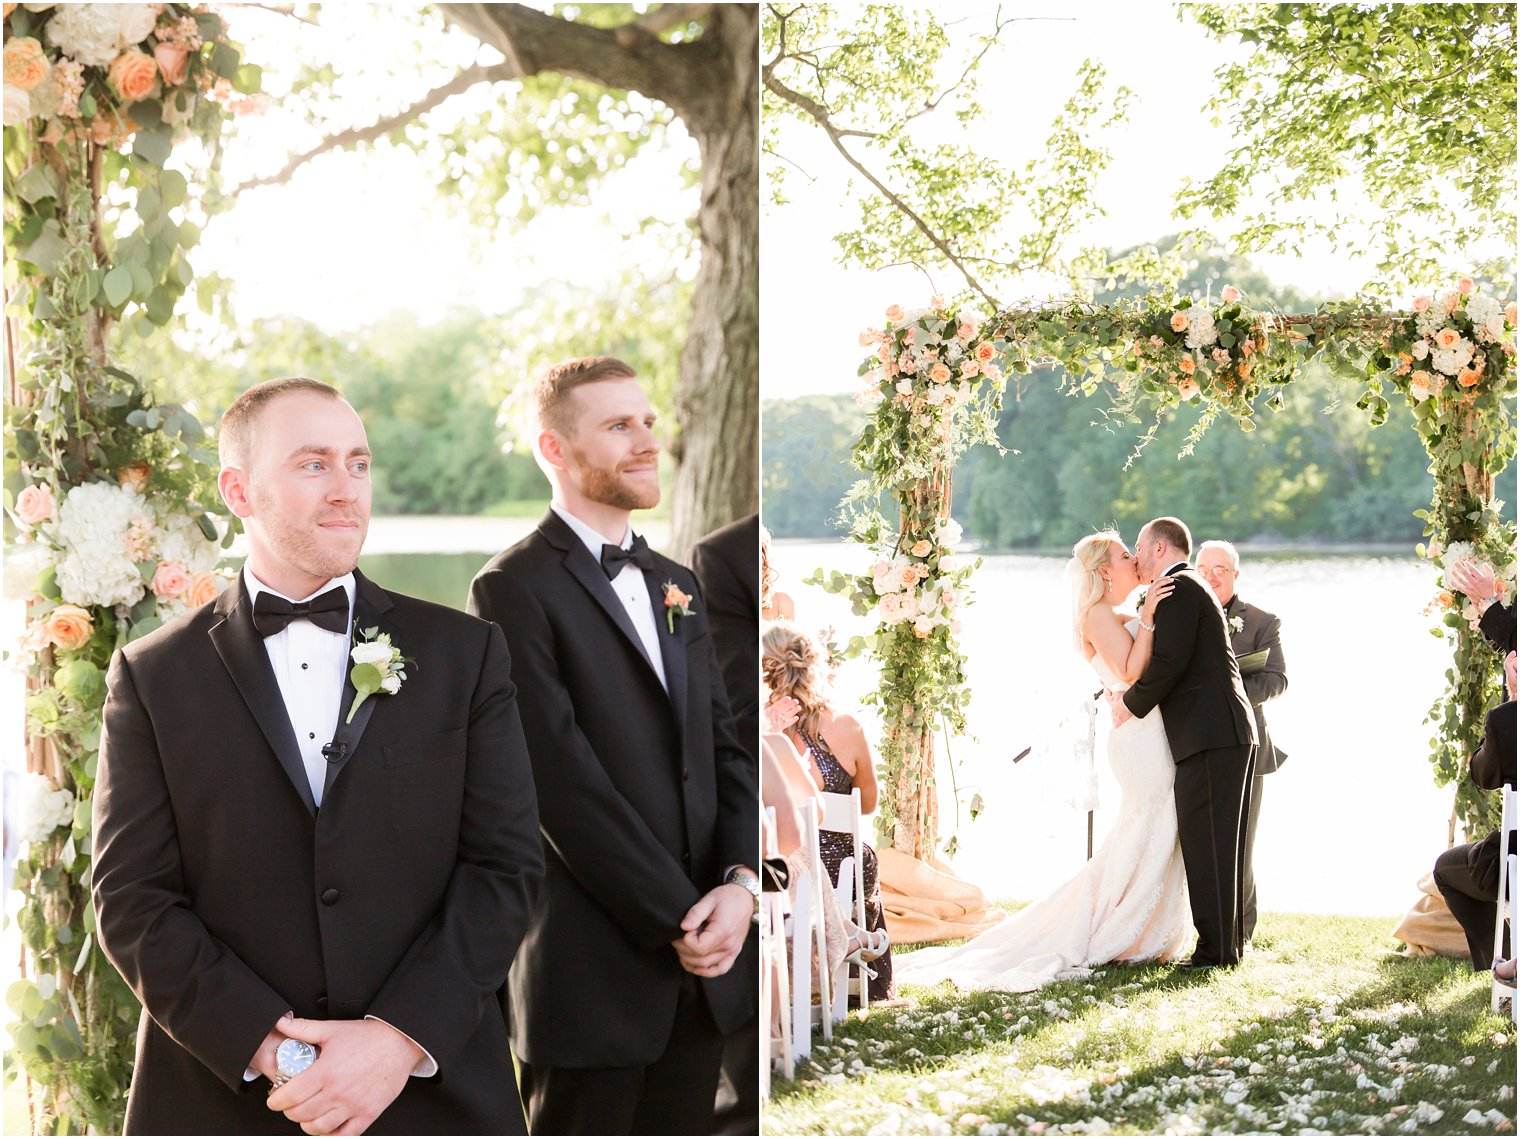 Lakeside summer ceremony at Indian Trail Club | Photos by Indian Trail Club Wedding Photographer Idalia Photography